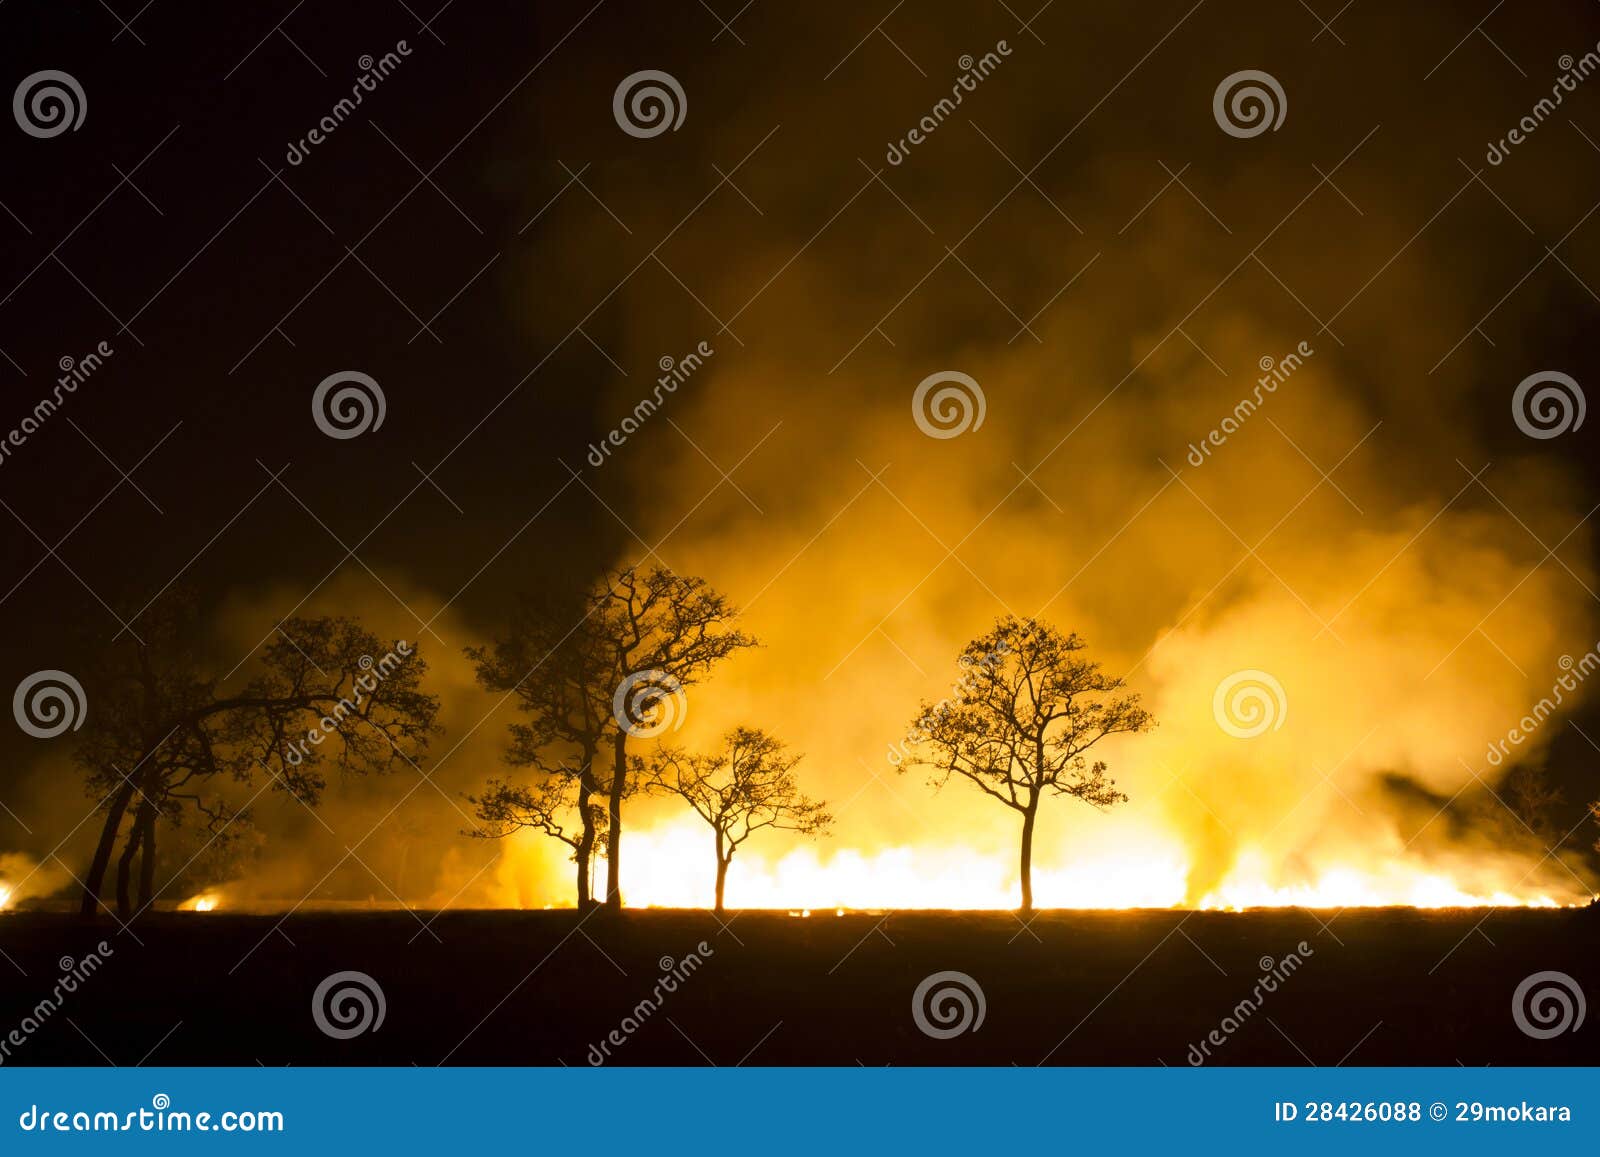 wildfire burning forest ecosystem is destroyed